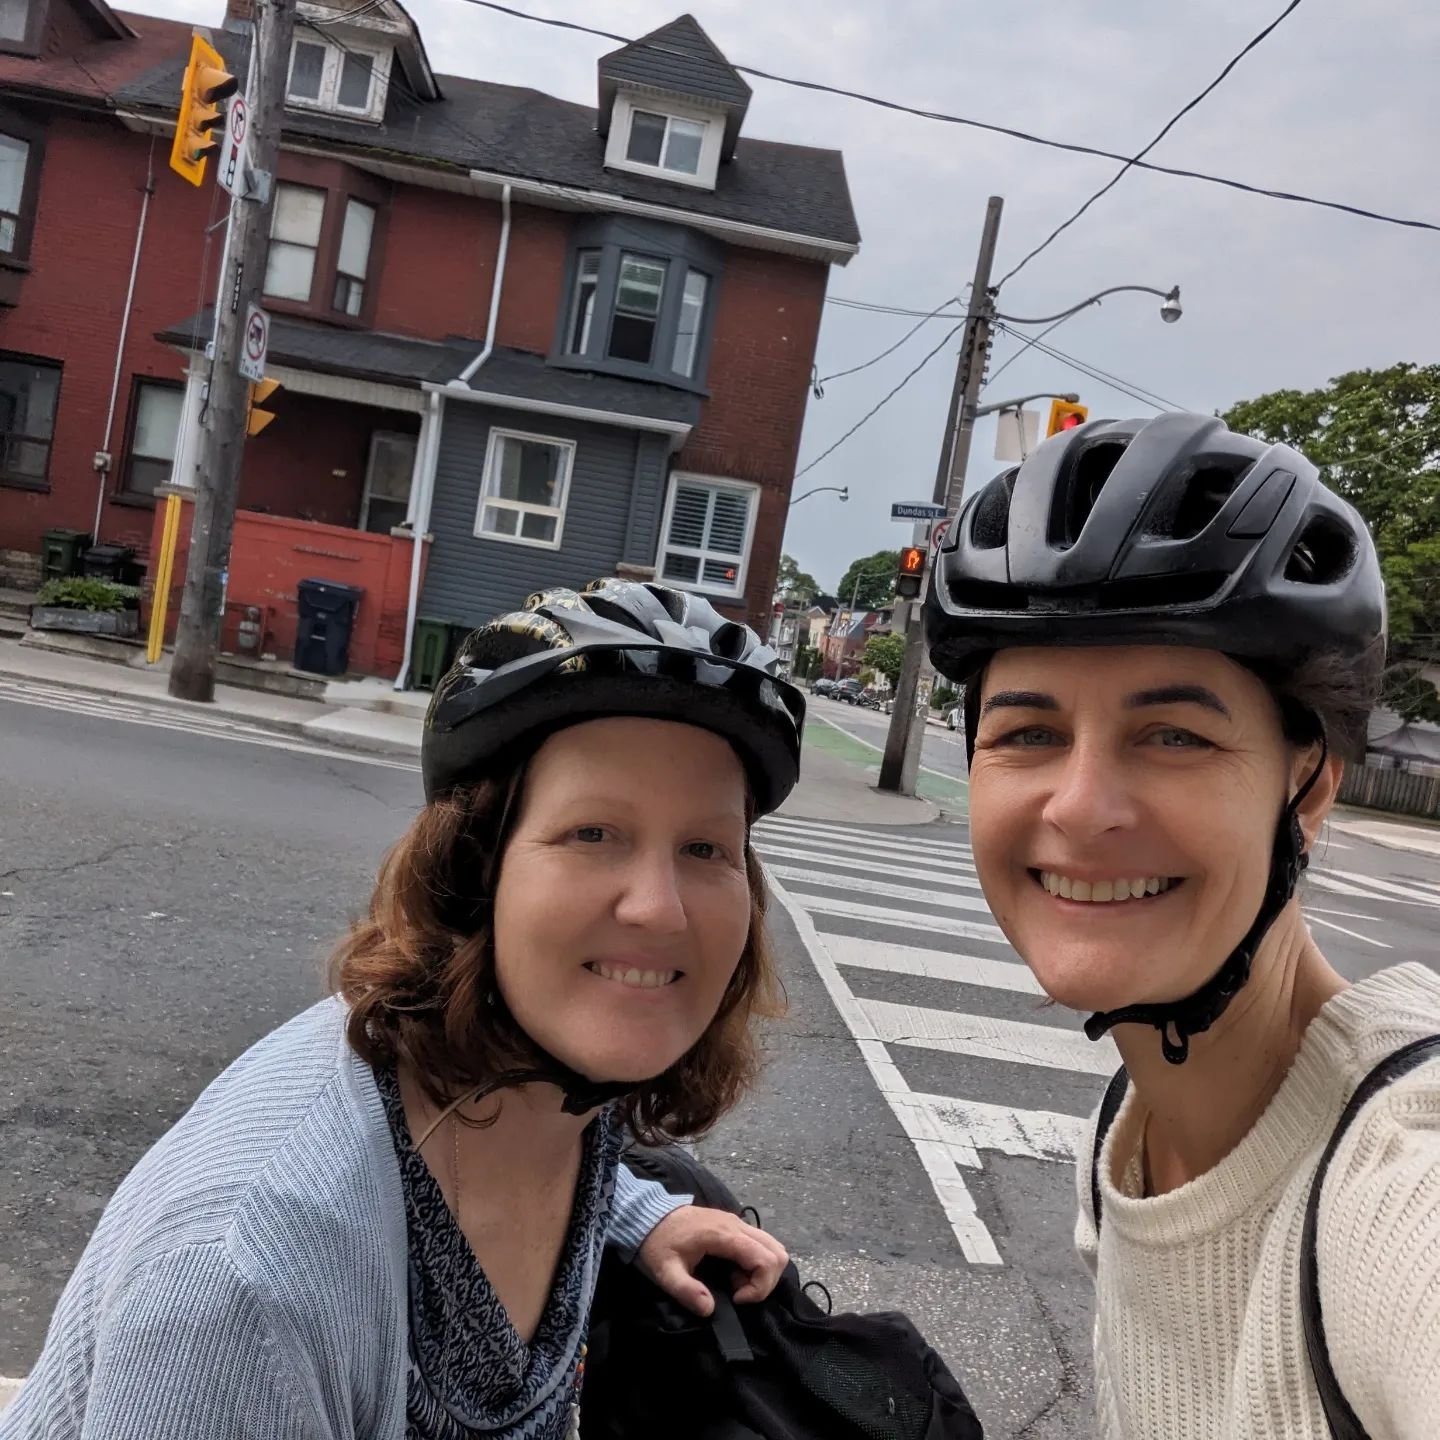 Check out who I bumped into during the morning bike commute! @trusteesara so of course we chatted about cuts to the TDSB, National School Food Programs, and our kiddos. I love bumping into elected officials out and about in the community.